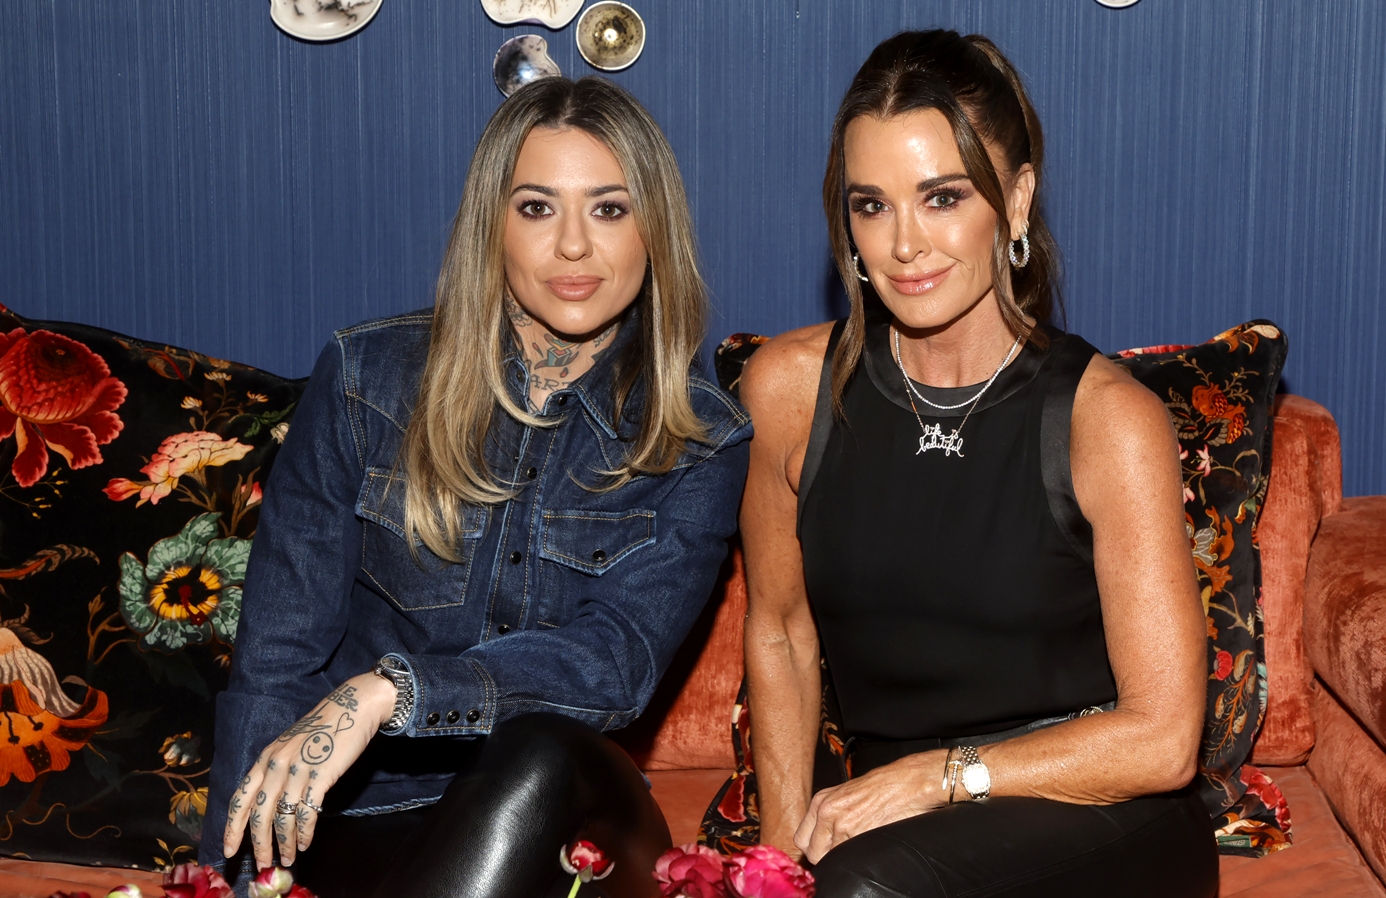 Morgan Wade Says Kyle Richards Stalked Her and Reveals Fight With Fan Over Kyle’s Tattoos as She Makes Her Debut In RHOBH Preview